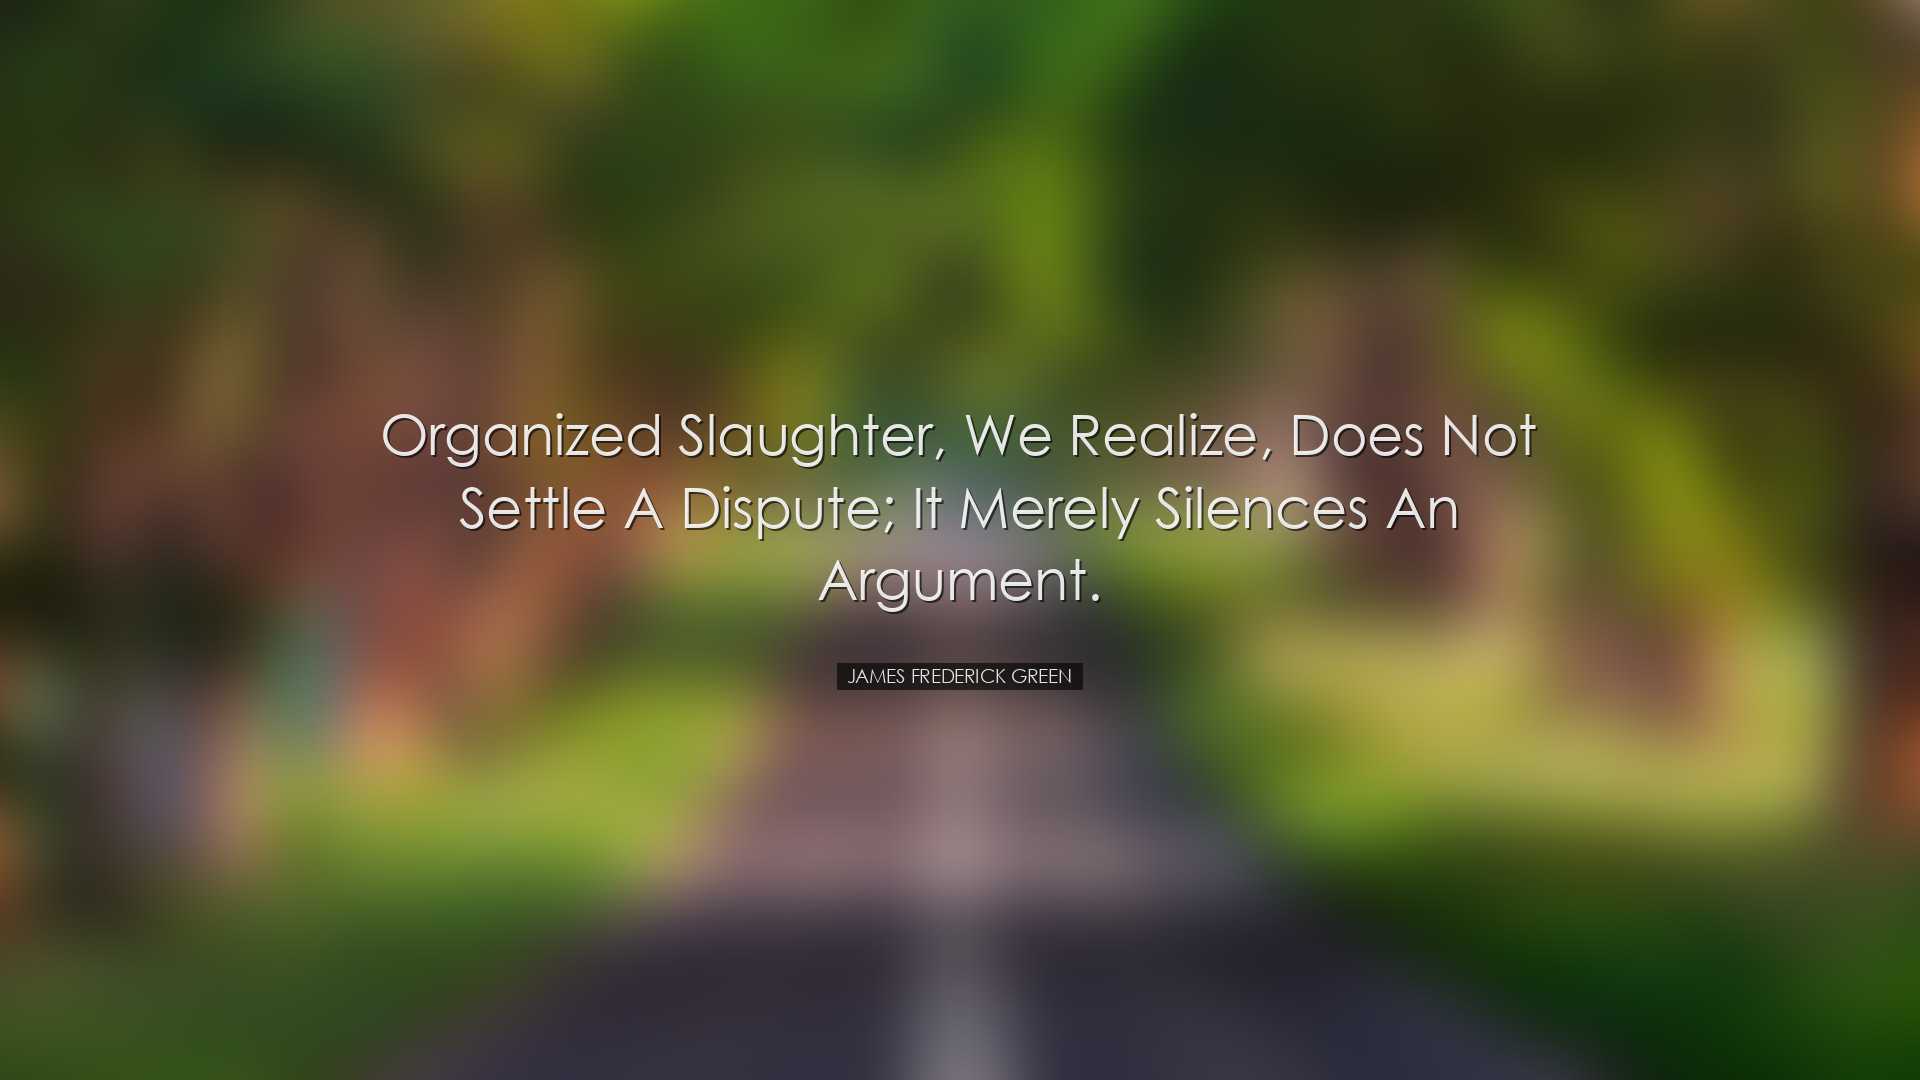 Organized slaughter, we realize, does not settle a dispute; it mer